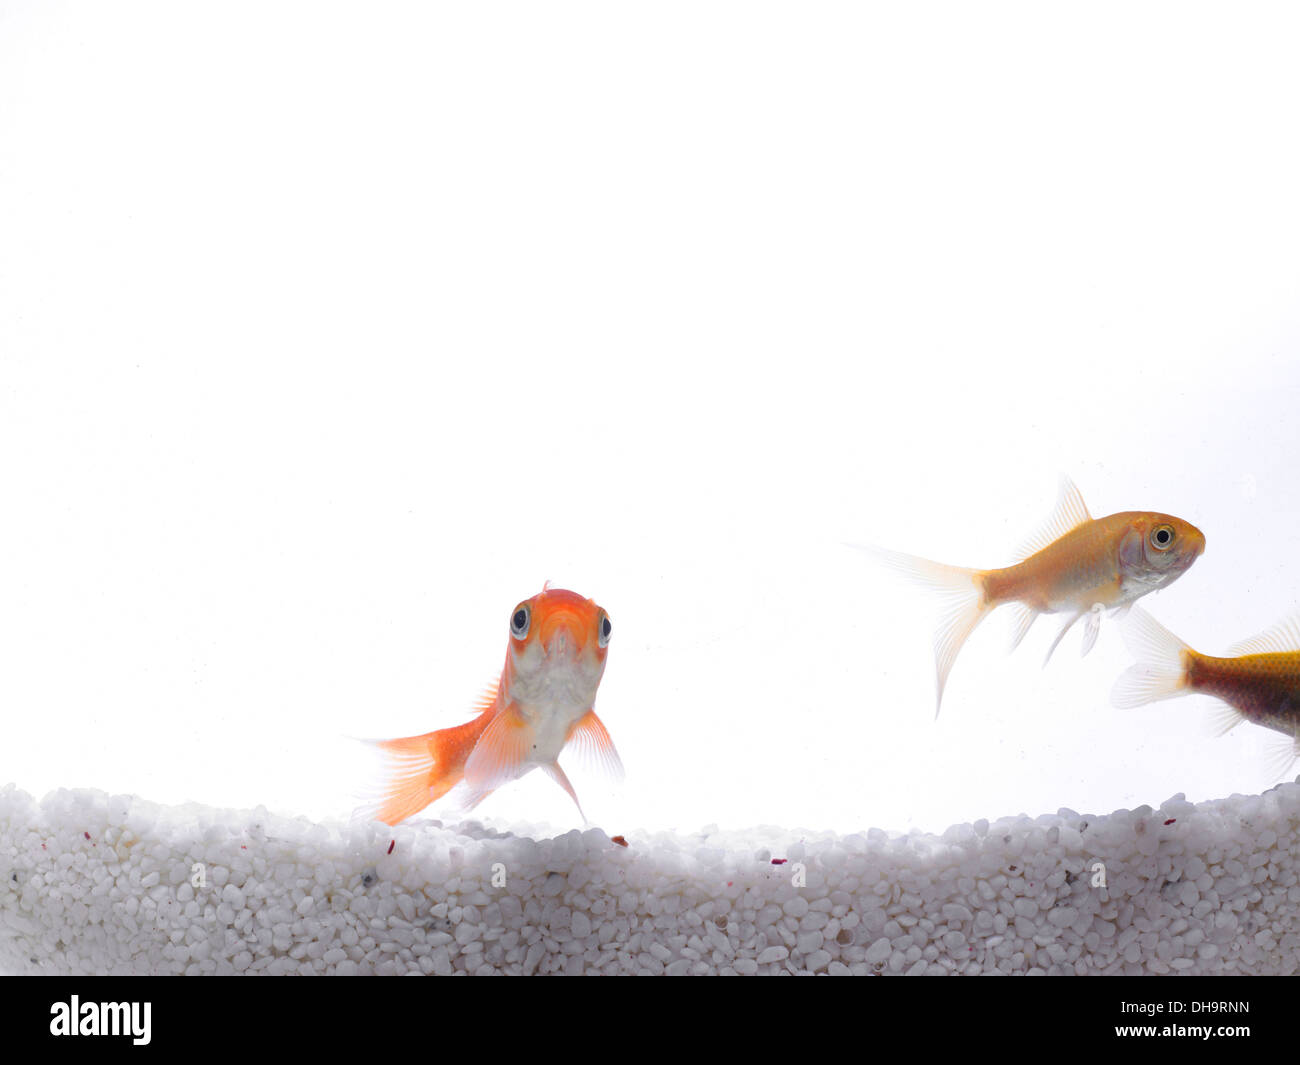 Three gold fishes swimming in the water Stock Photo